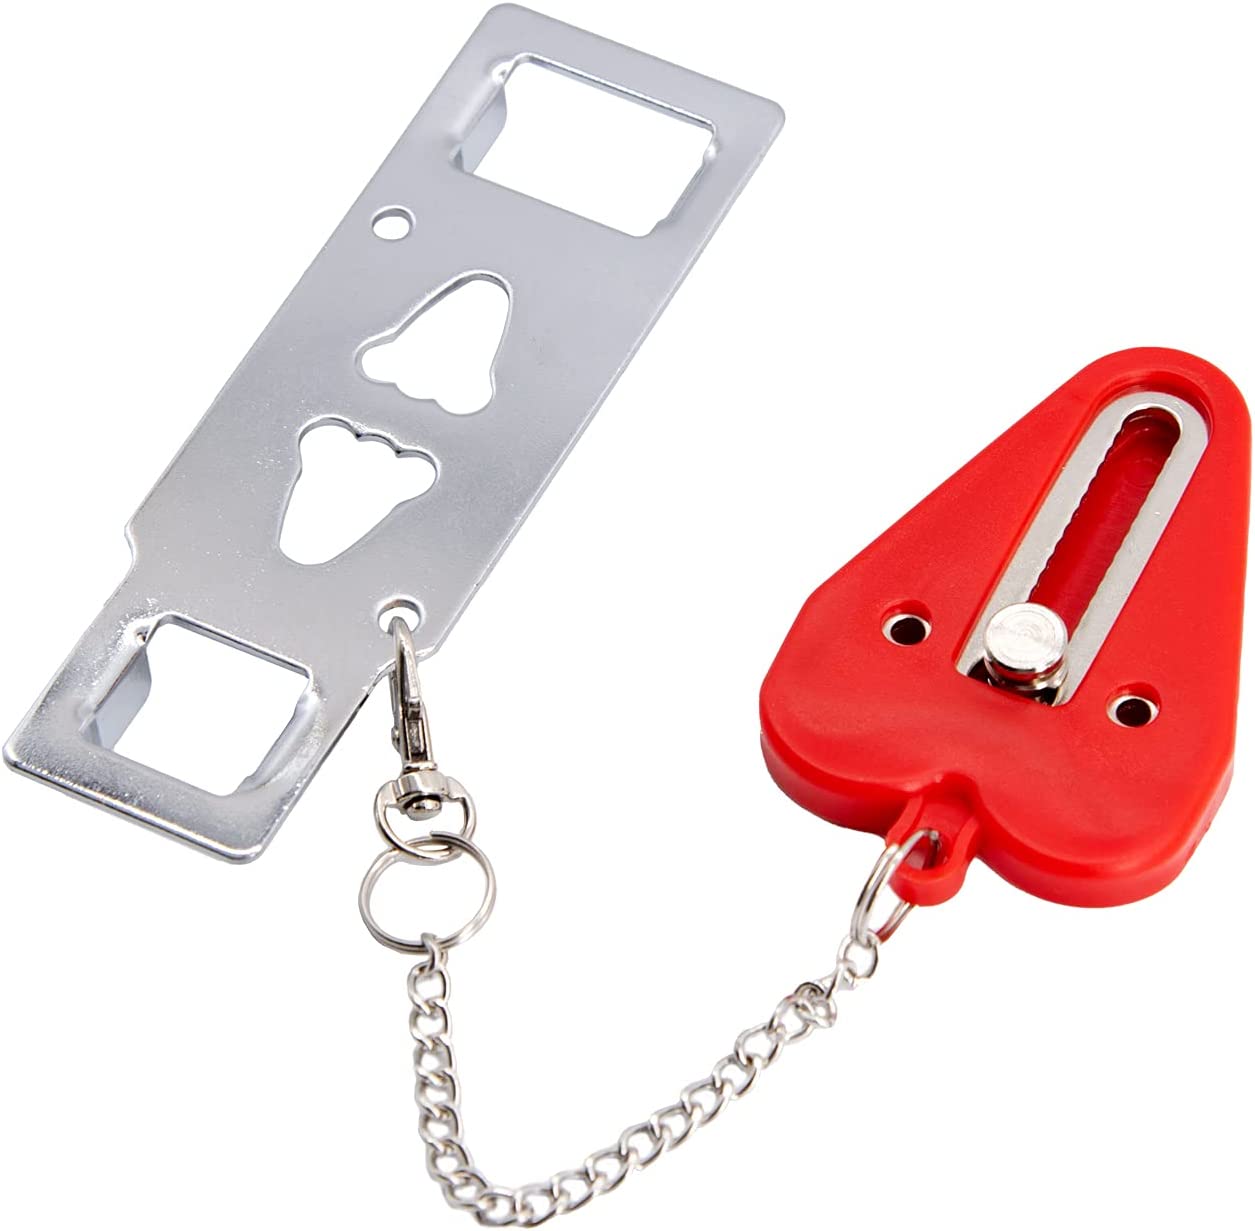 Red Portable Door Lock Family Travel AirBNB Hotel School Home Apartment Security Devices Door Locks Jammer Self Defense for Additional Safety